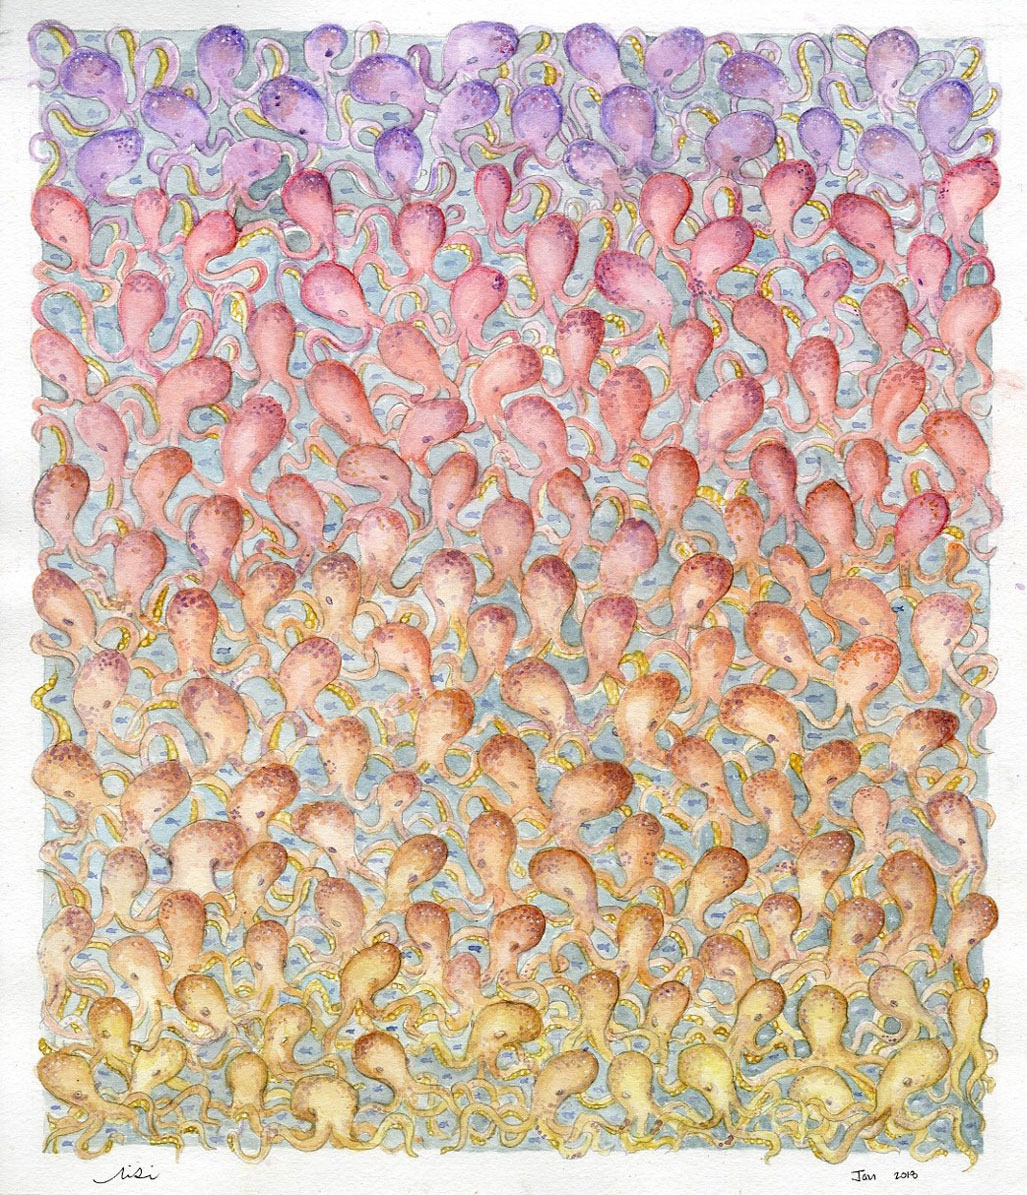 A field of octopi fills the painting, tangled together in a color gradient from purple to golden, by Sarah Ruyle